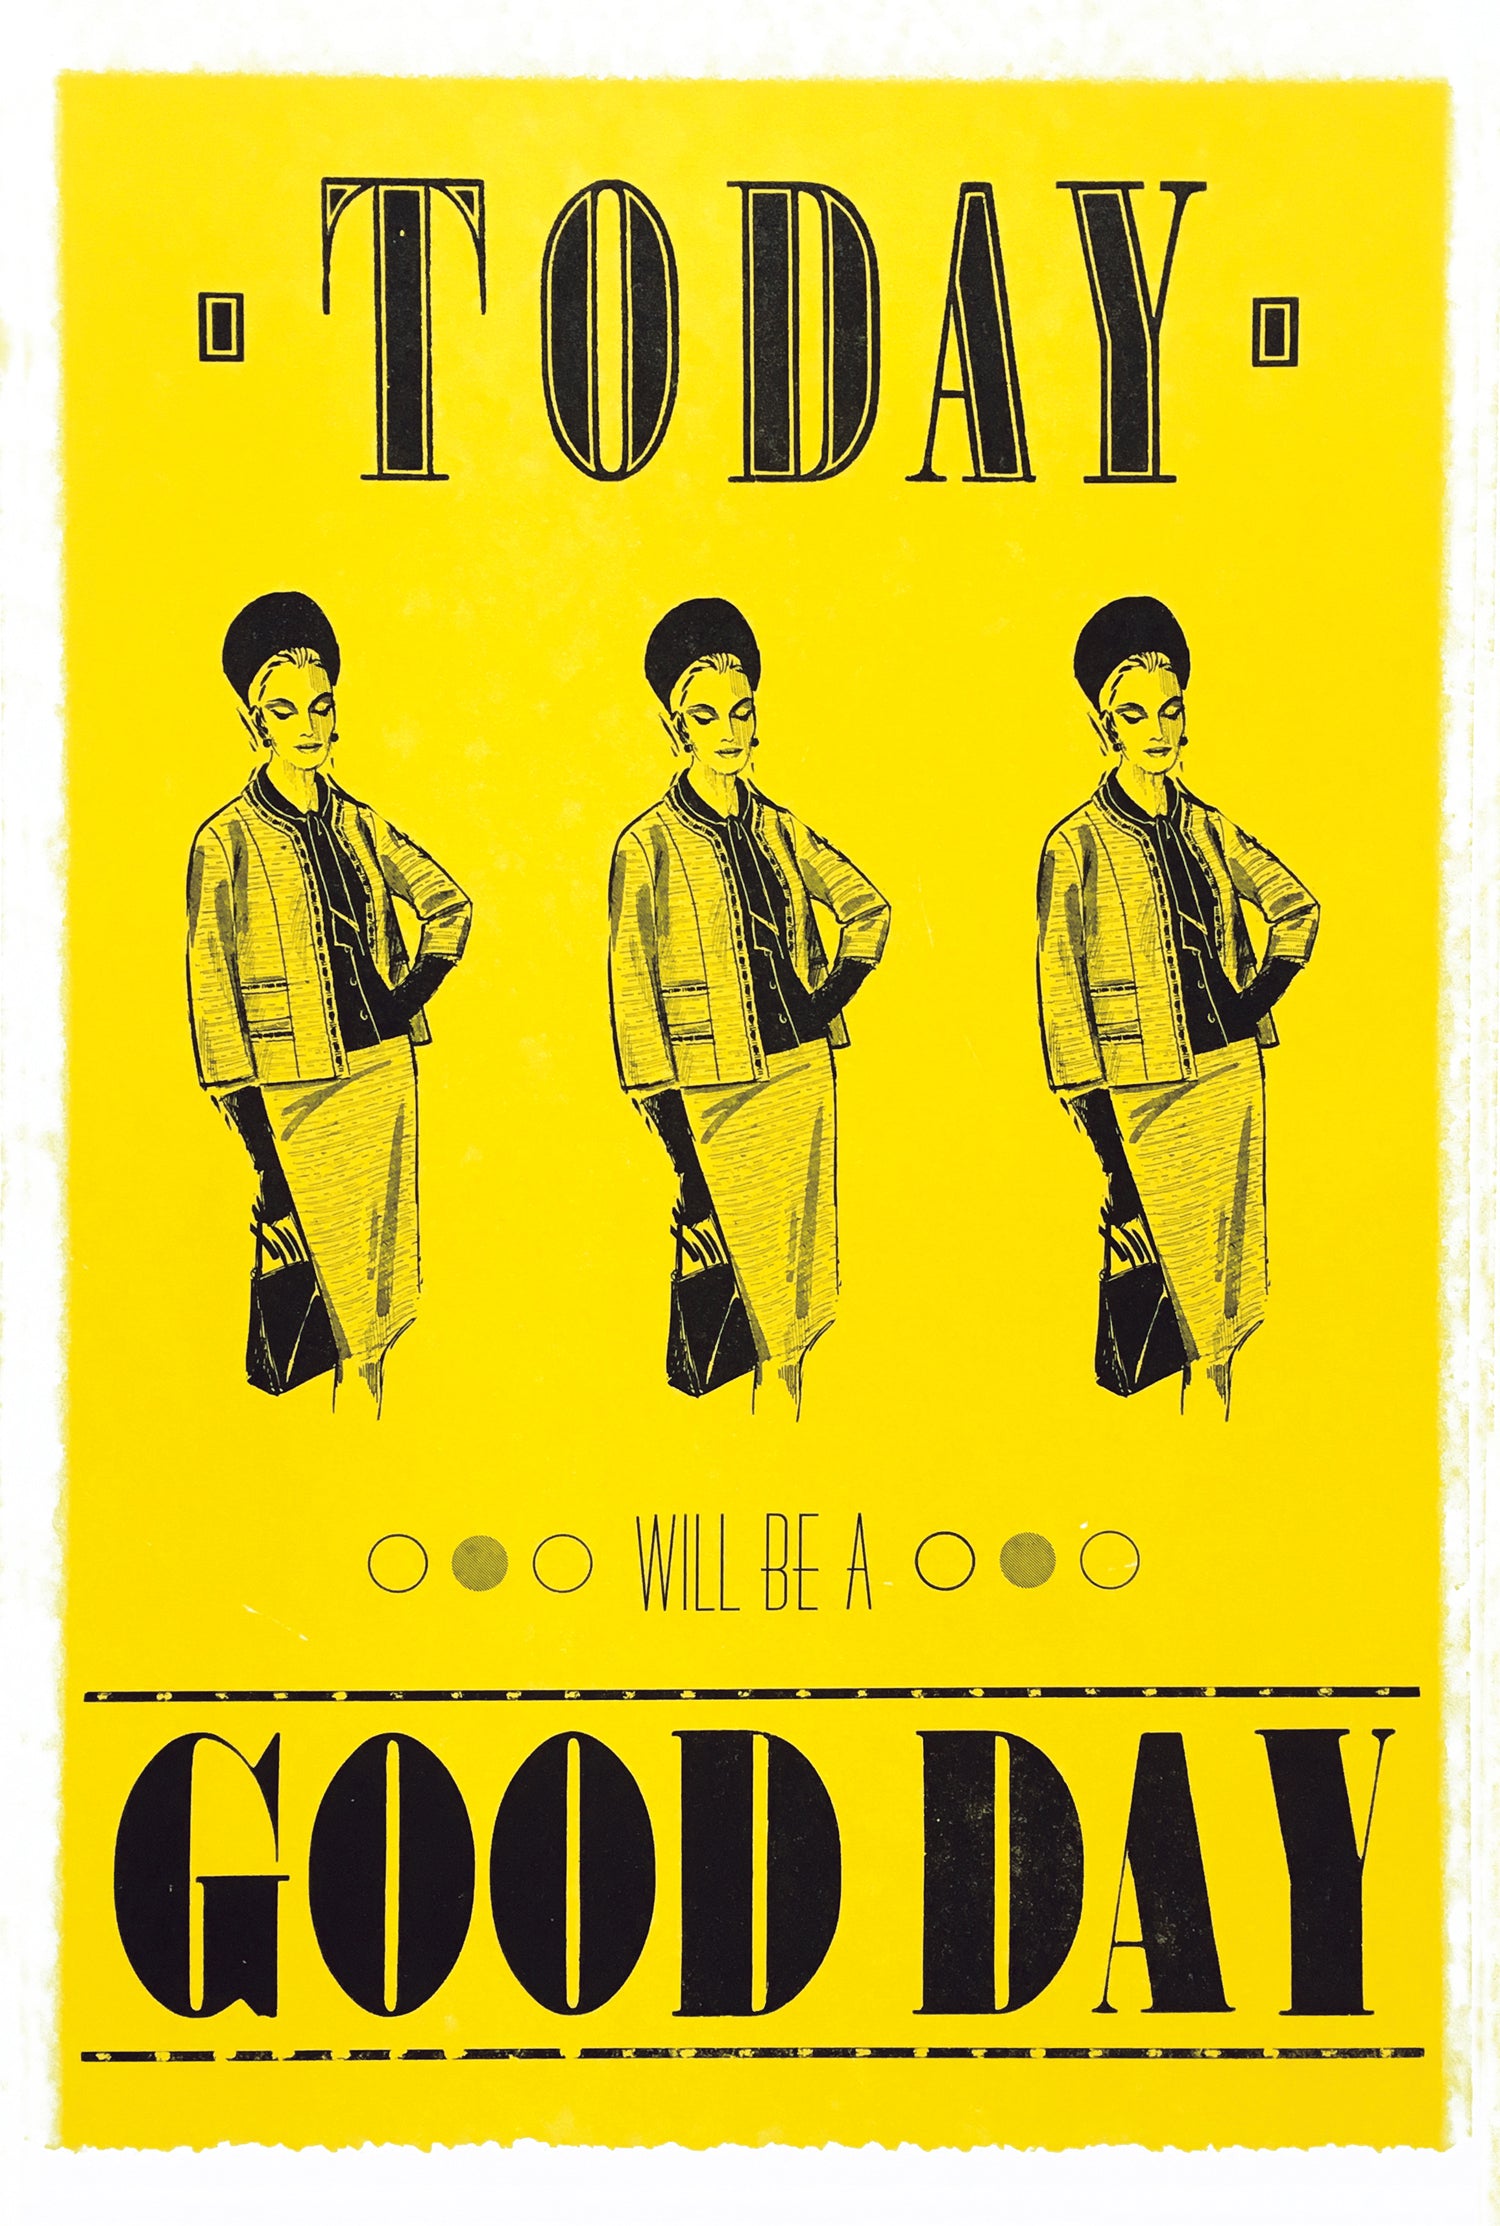 Today will be a good day positive motivational letterpress poster